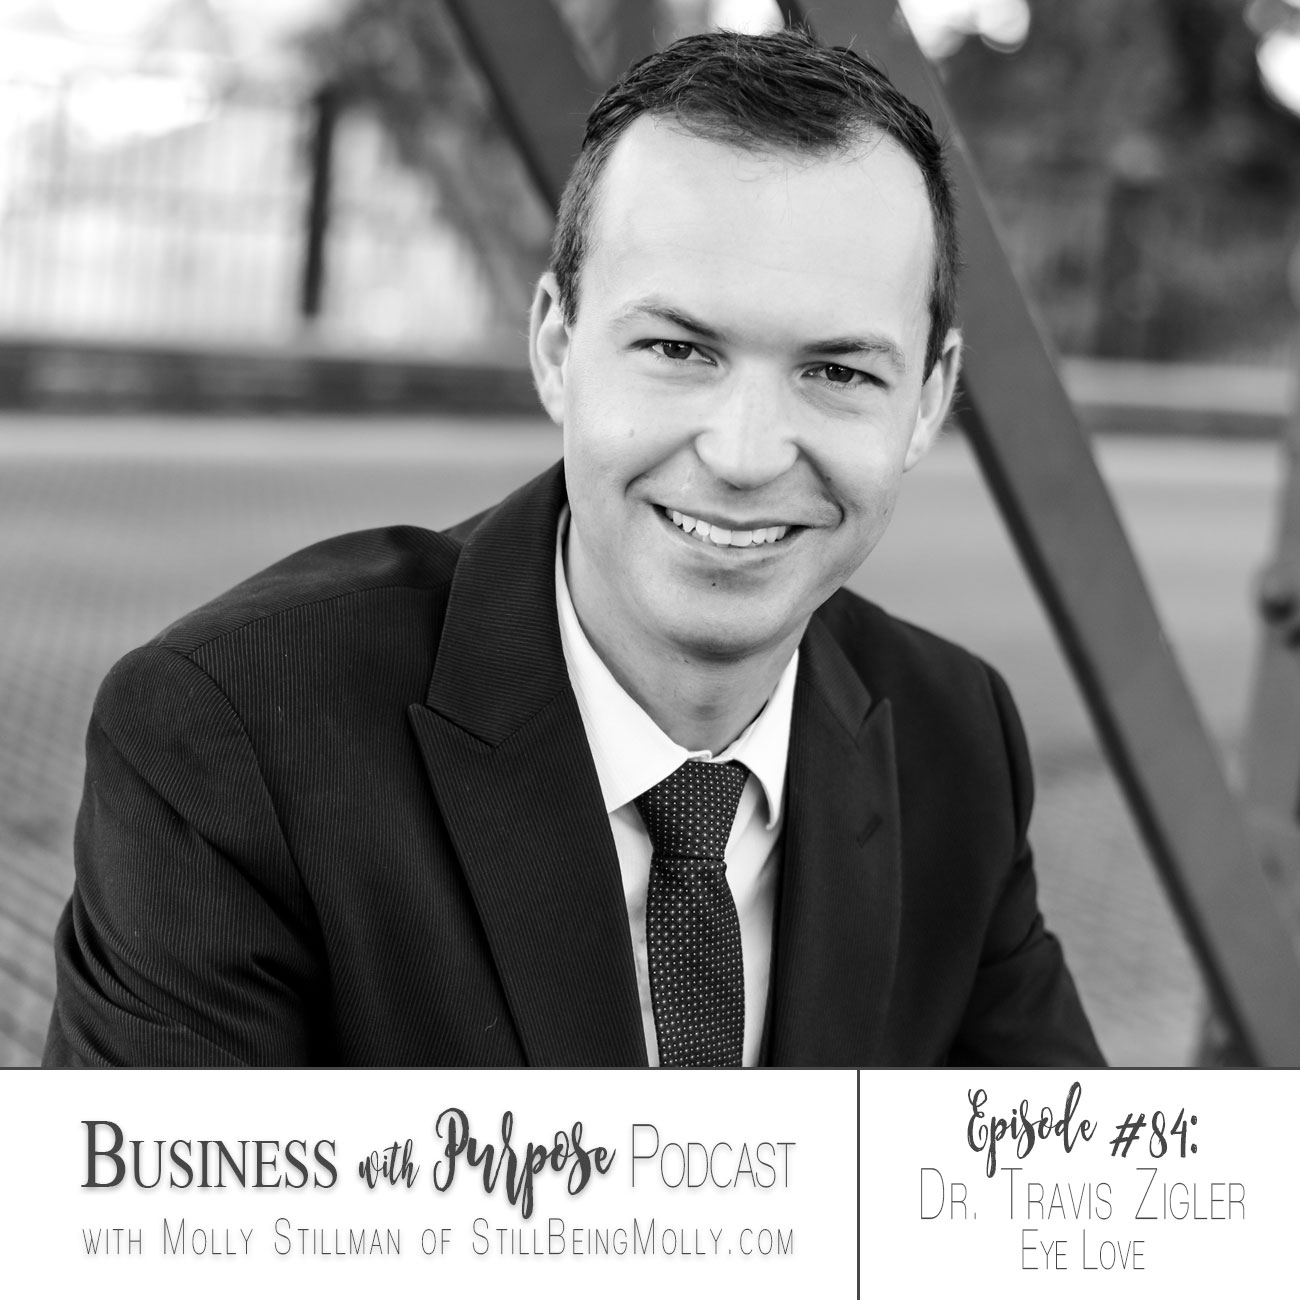 Business with Purpose Podcast EP 84: Dr. Travis Zigler, Eye Love by popular North Carolina ethical blogger and podcaster Still Being Molly